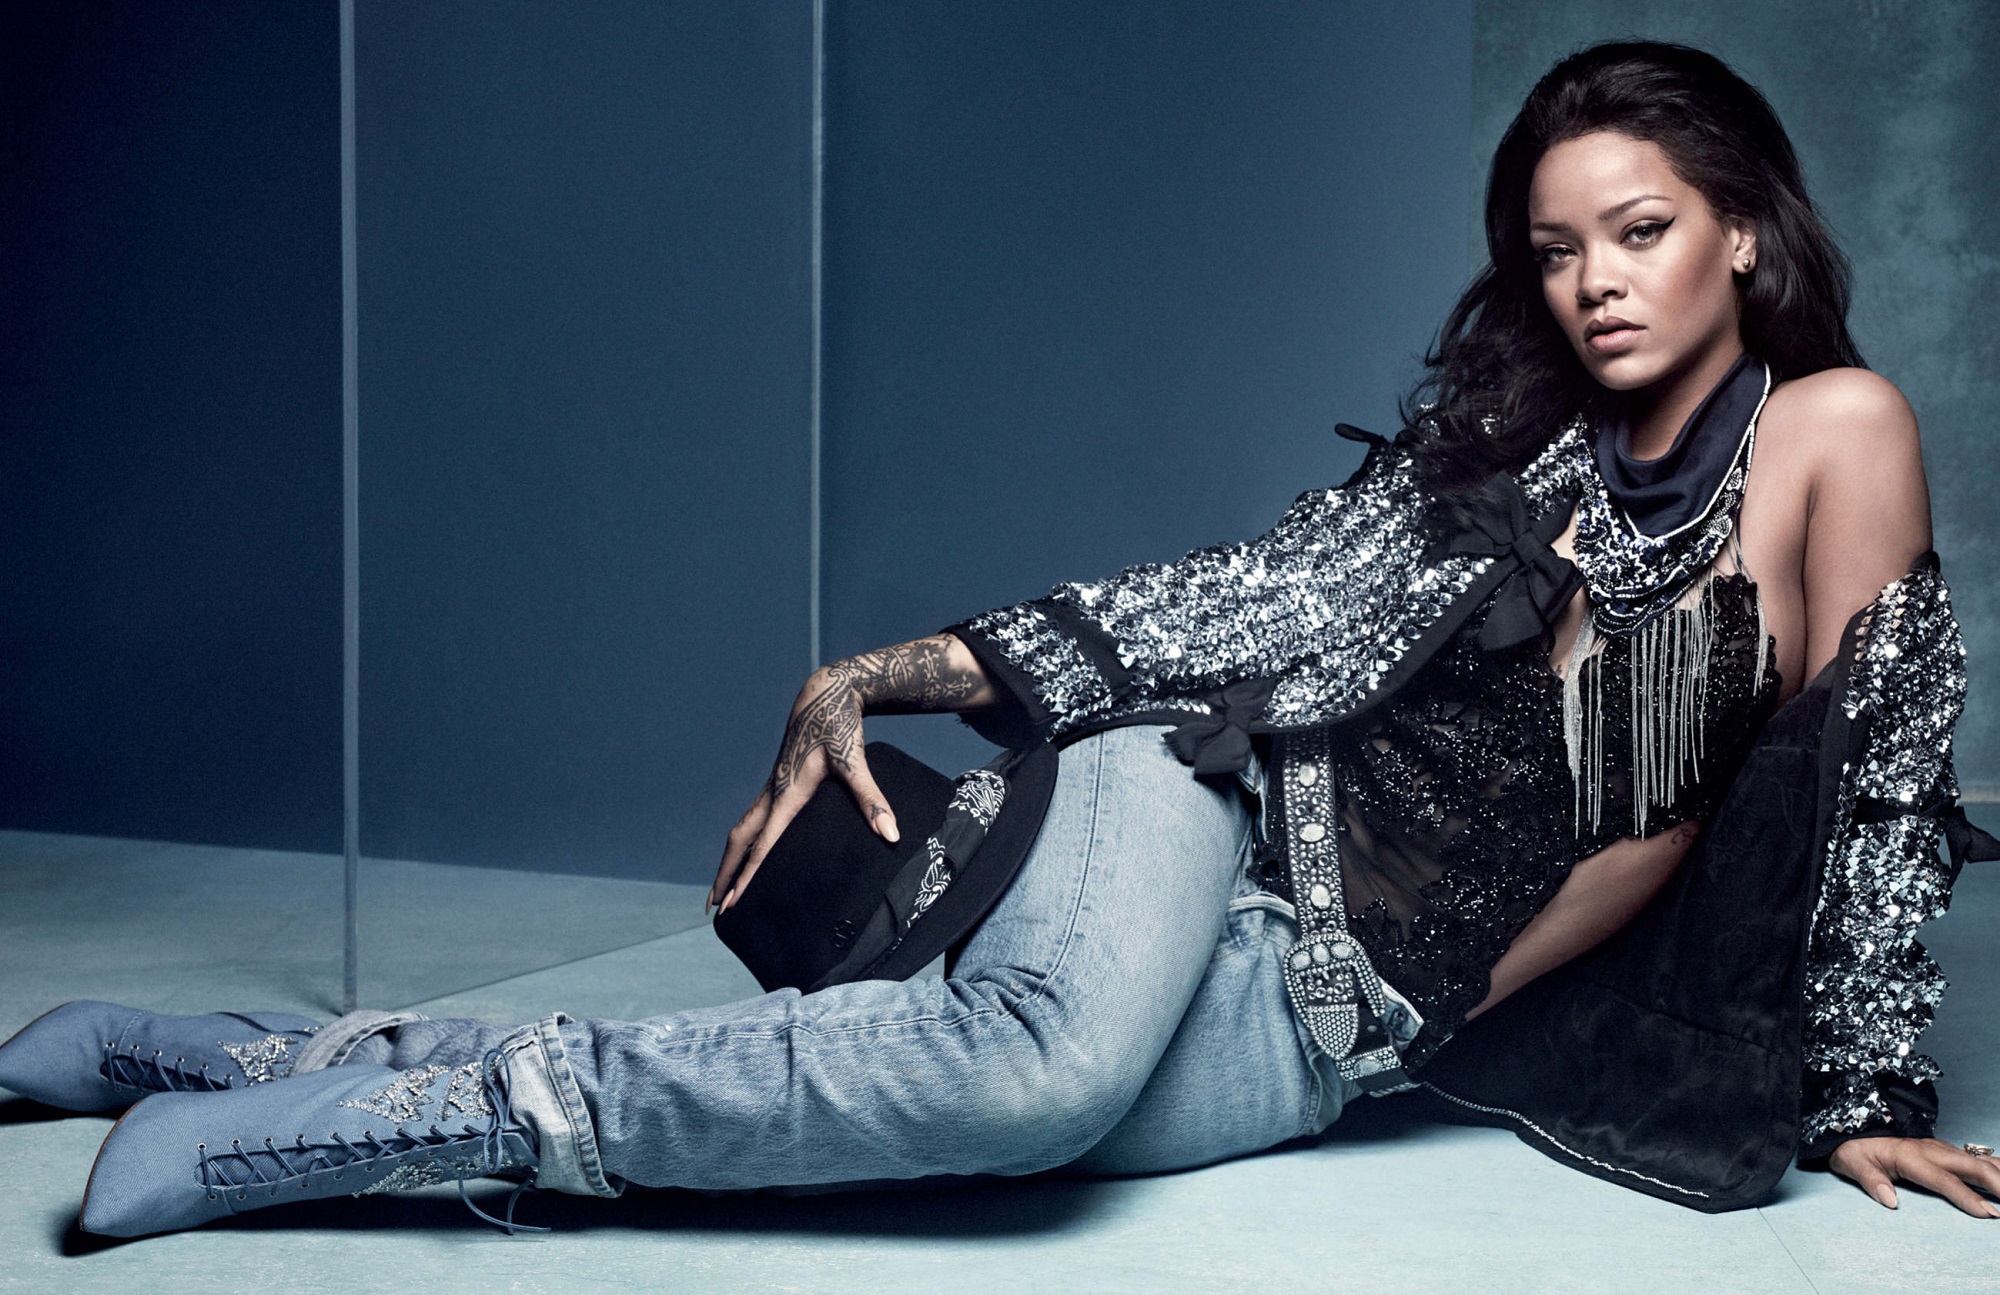 The Rihanna x Manolo Blahnik collection goes on sale in Hong Kong starting  May the 5th - Retail in Asia